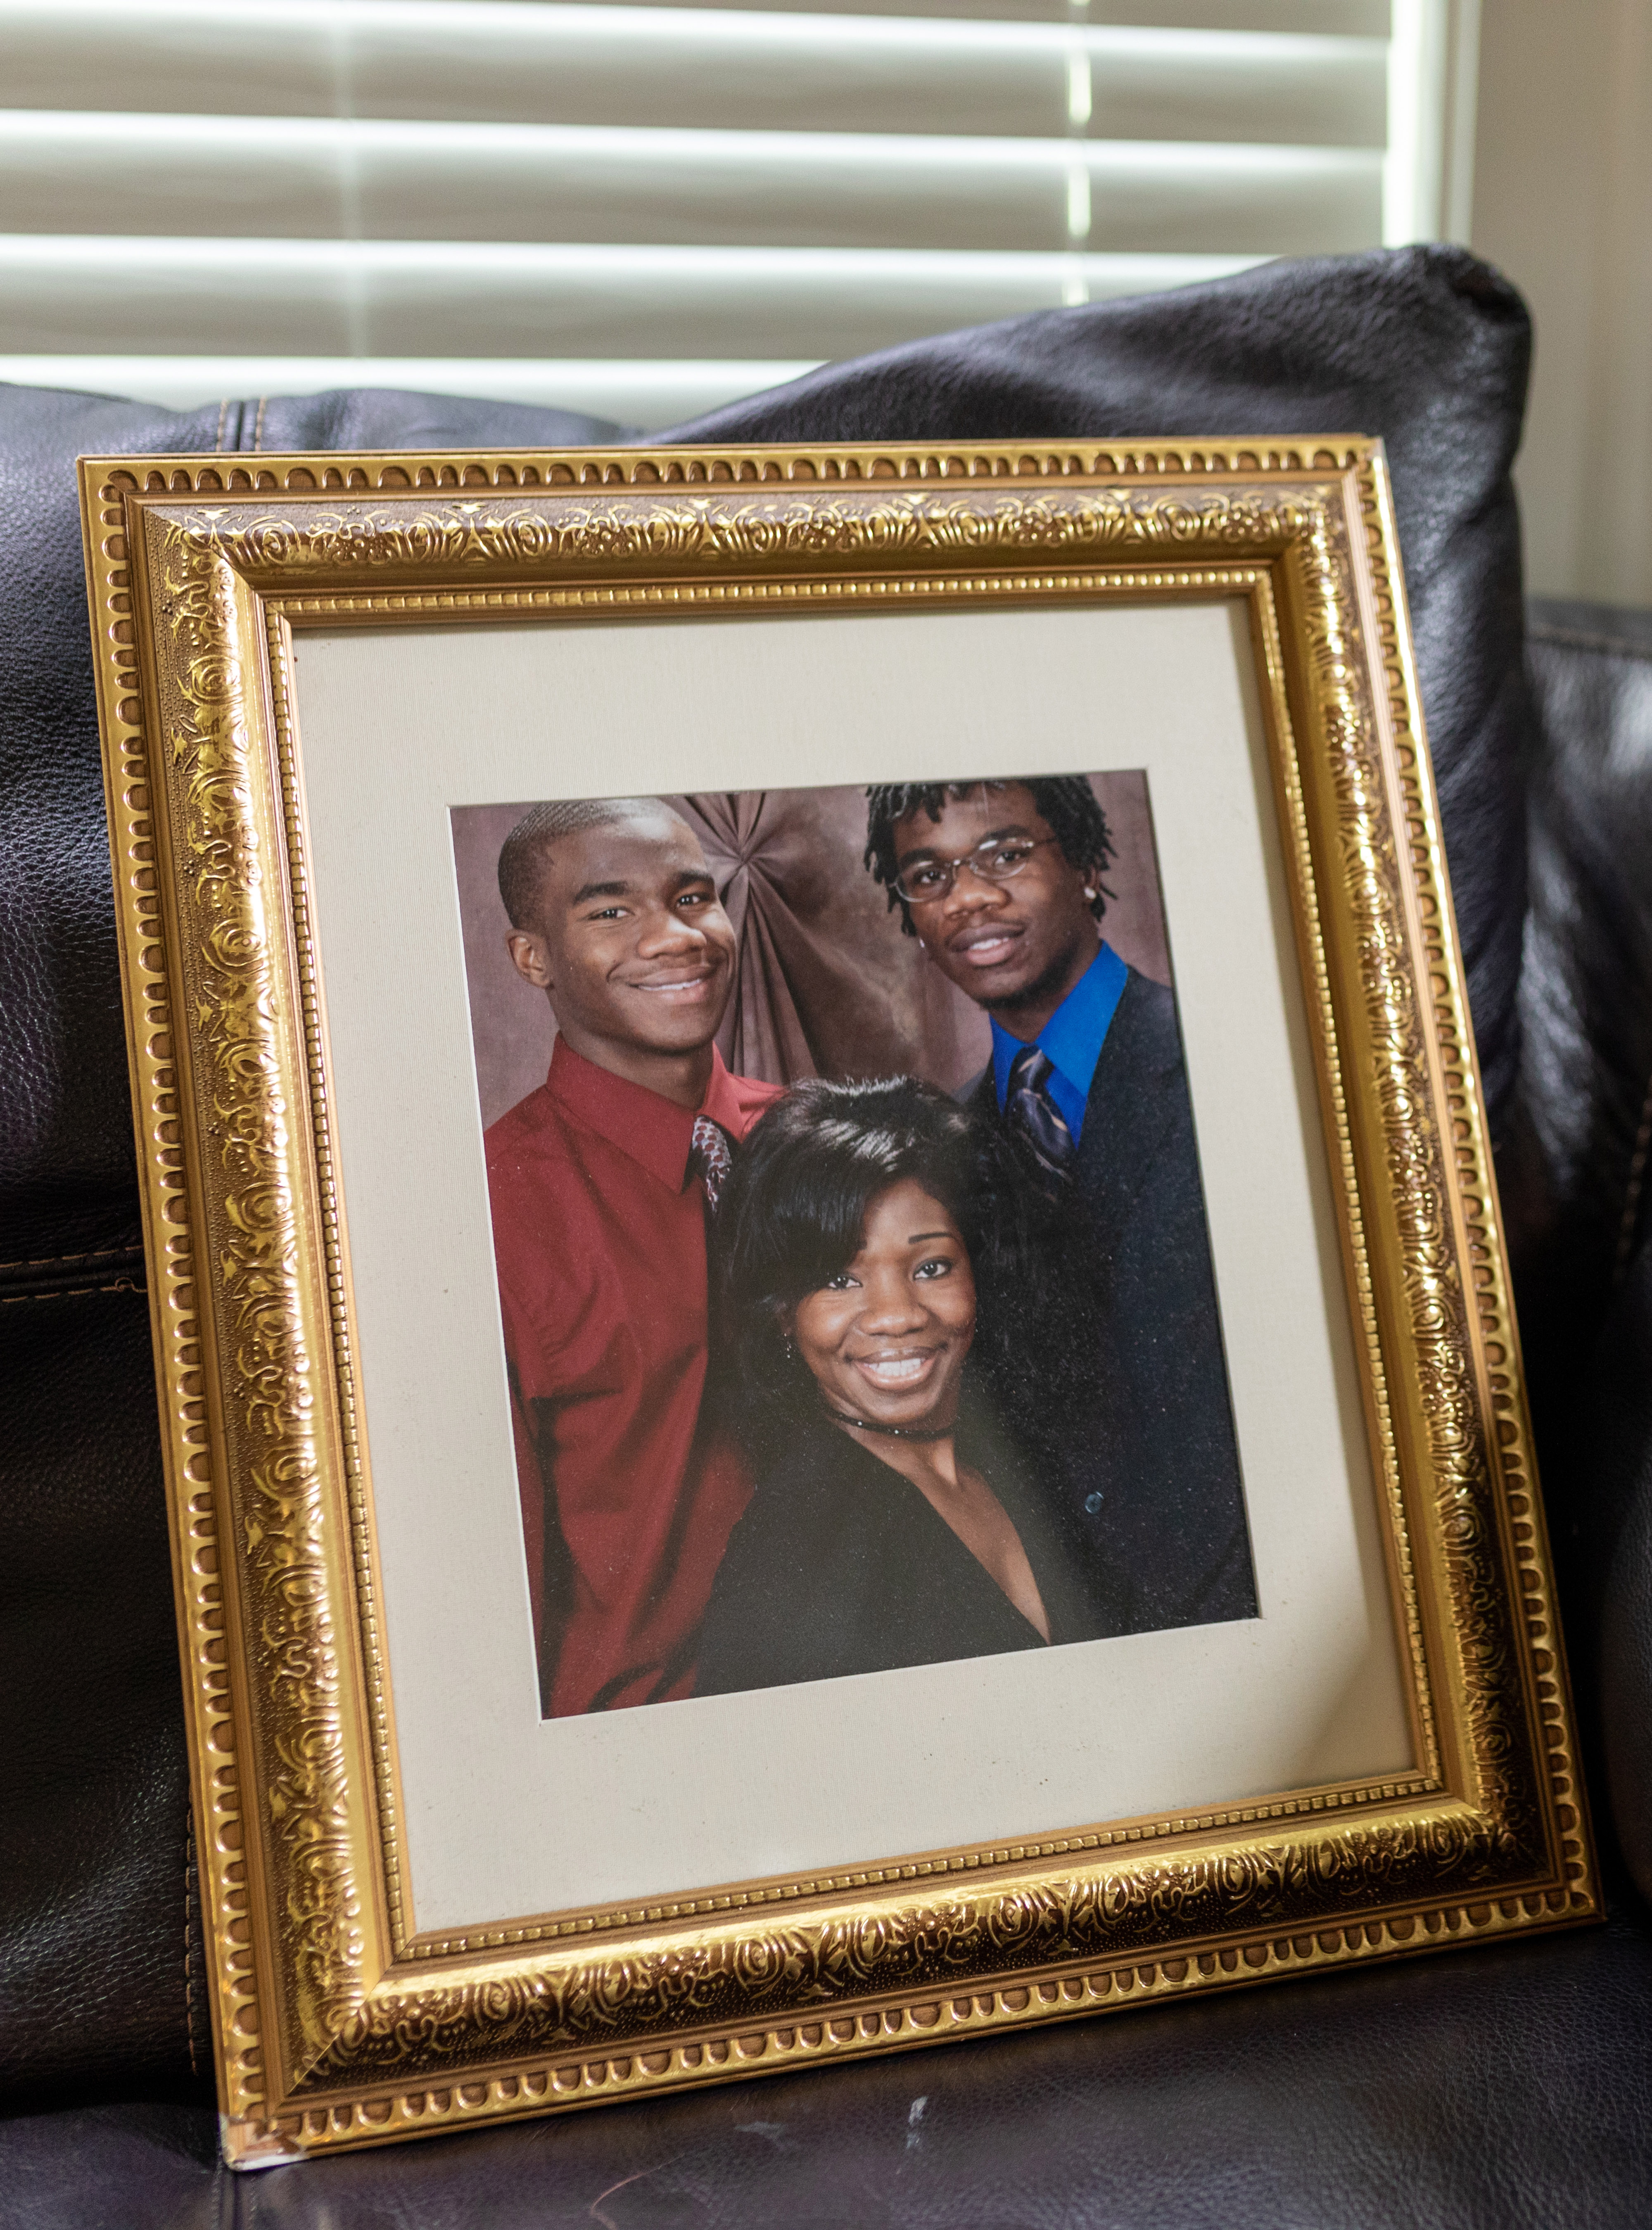 Jamarion Robinson, at left in red in a family photo